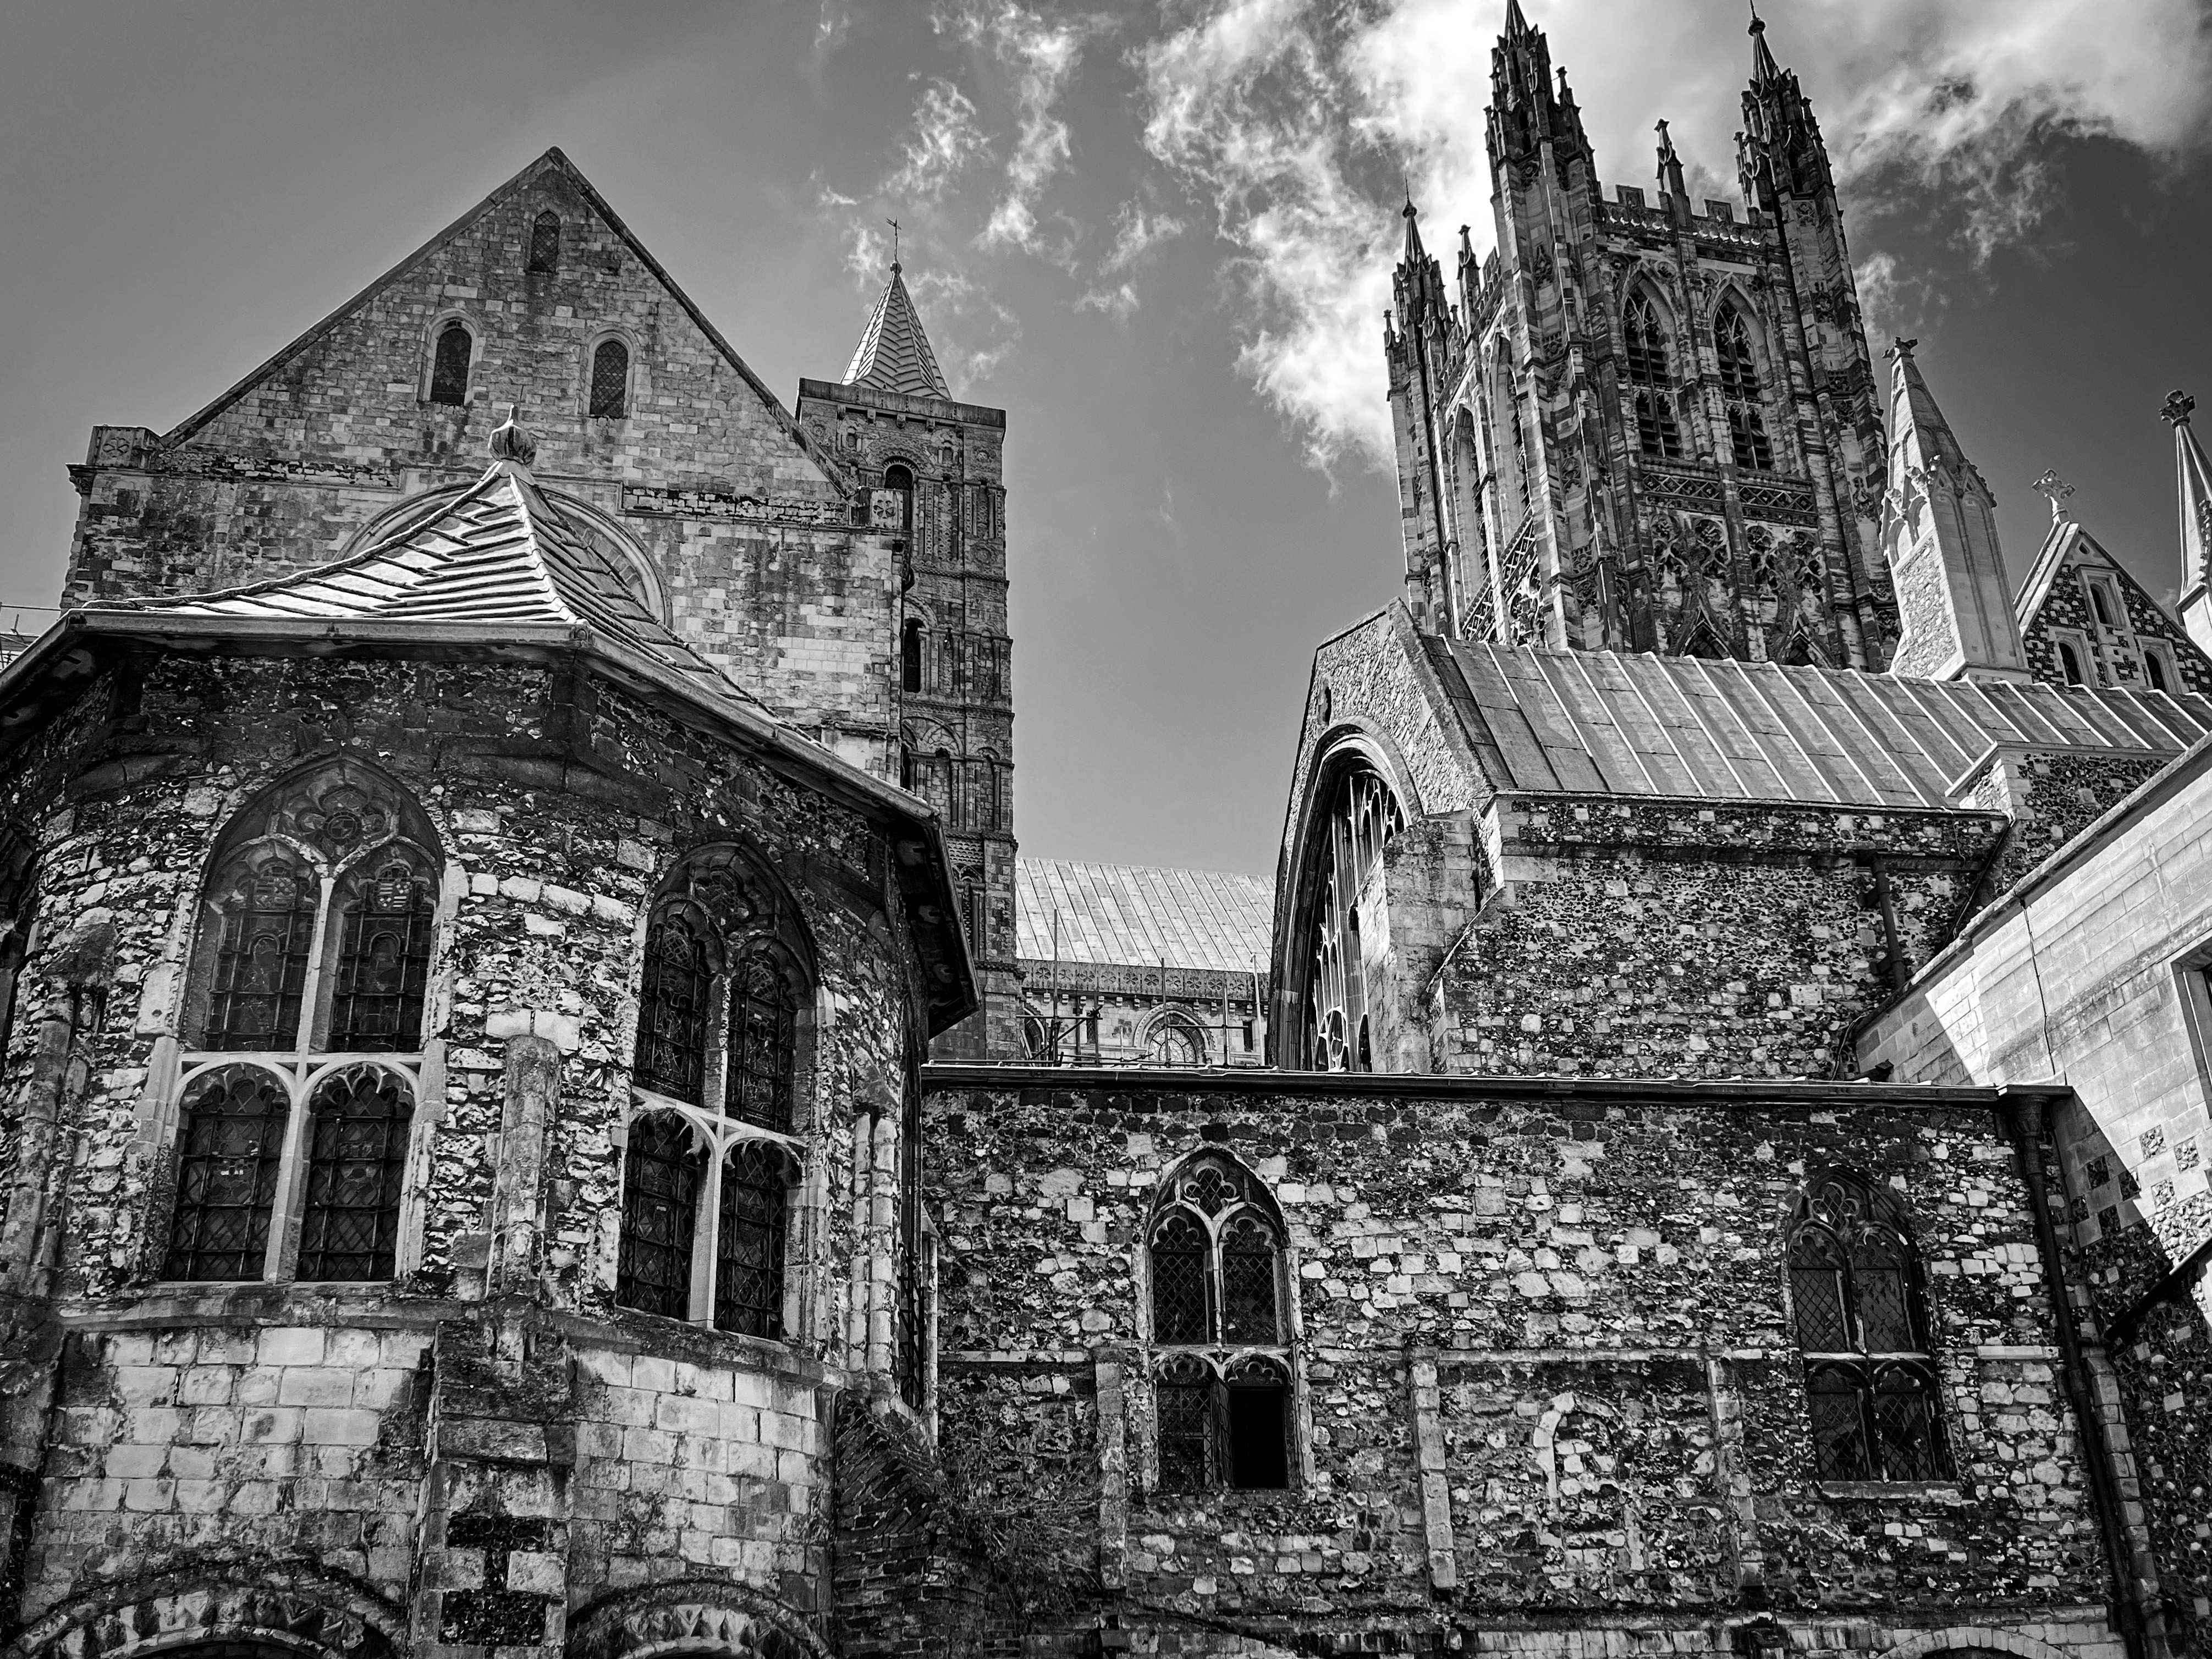 A black and white photo of a medieval cistern at Canterbury Cathedral in Canterbury, Kent, England. The cistern itself is a cylindrical add-on to the main part of the building and appears on the left side of the image. Rising in the background is the cathedral's bell tower.